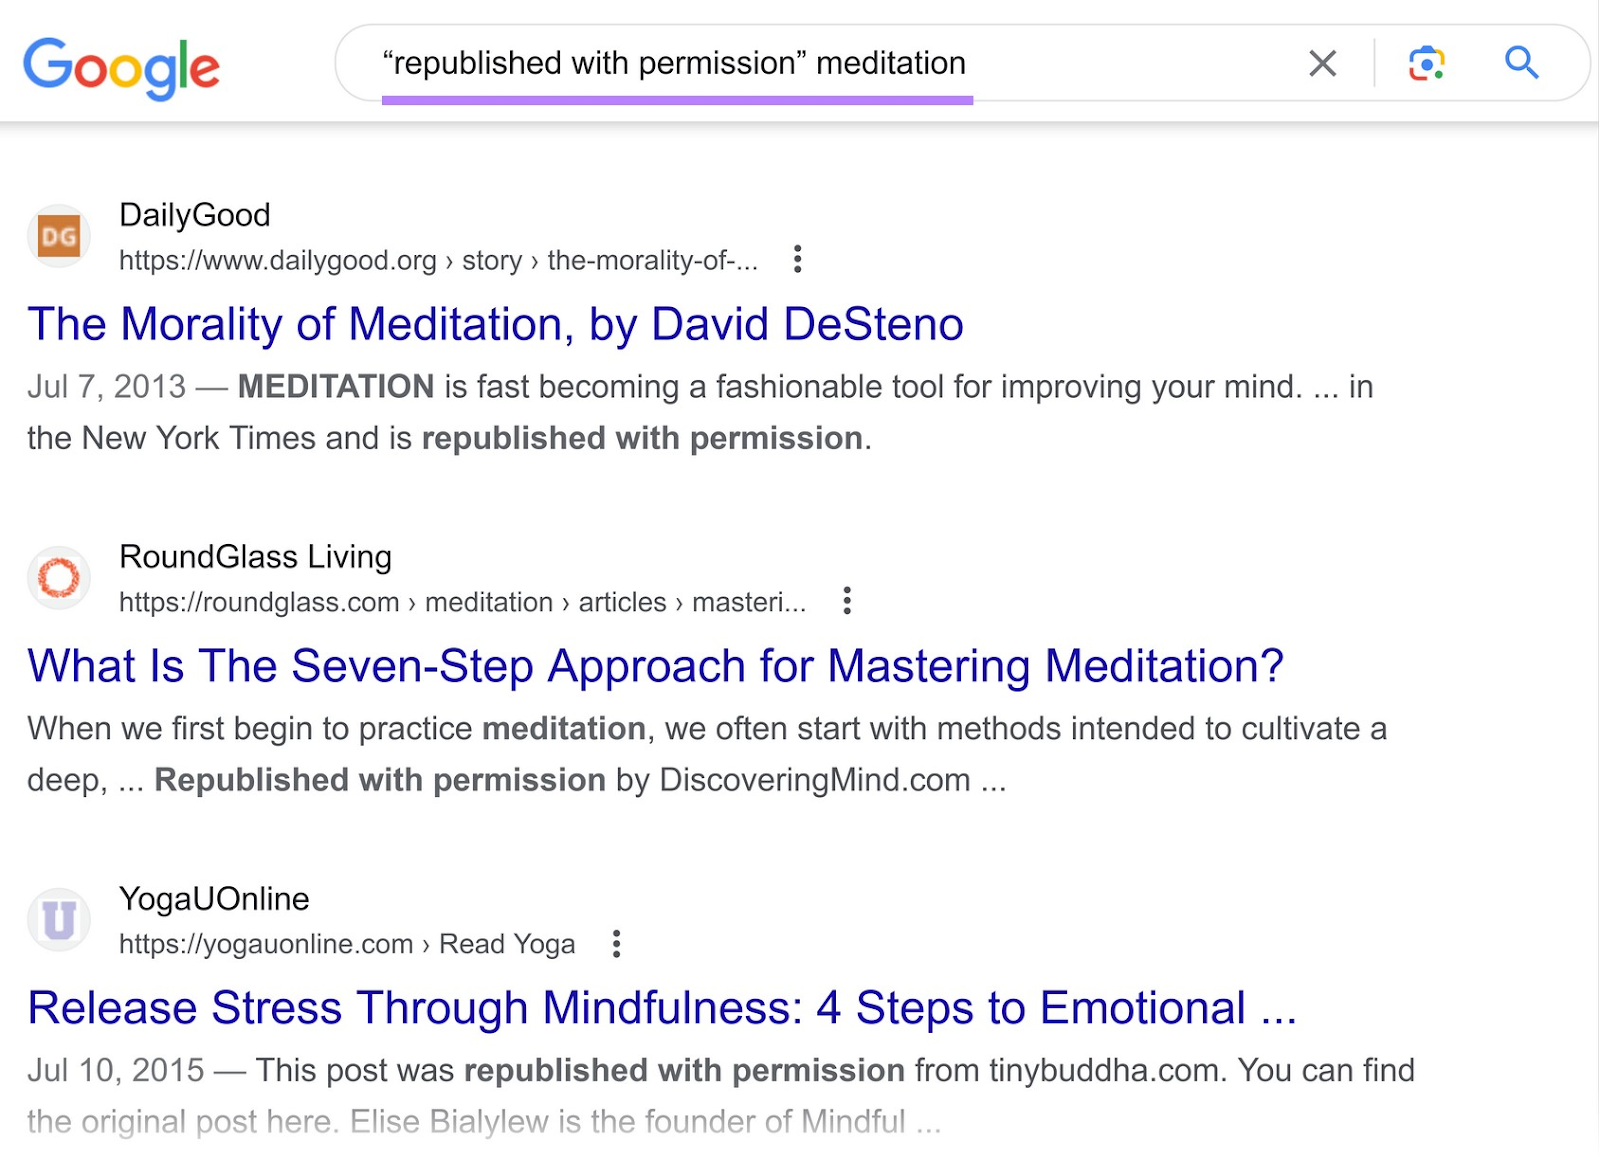 Google SERP for ““republished with permission” meditation” query